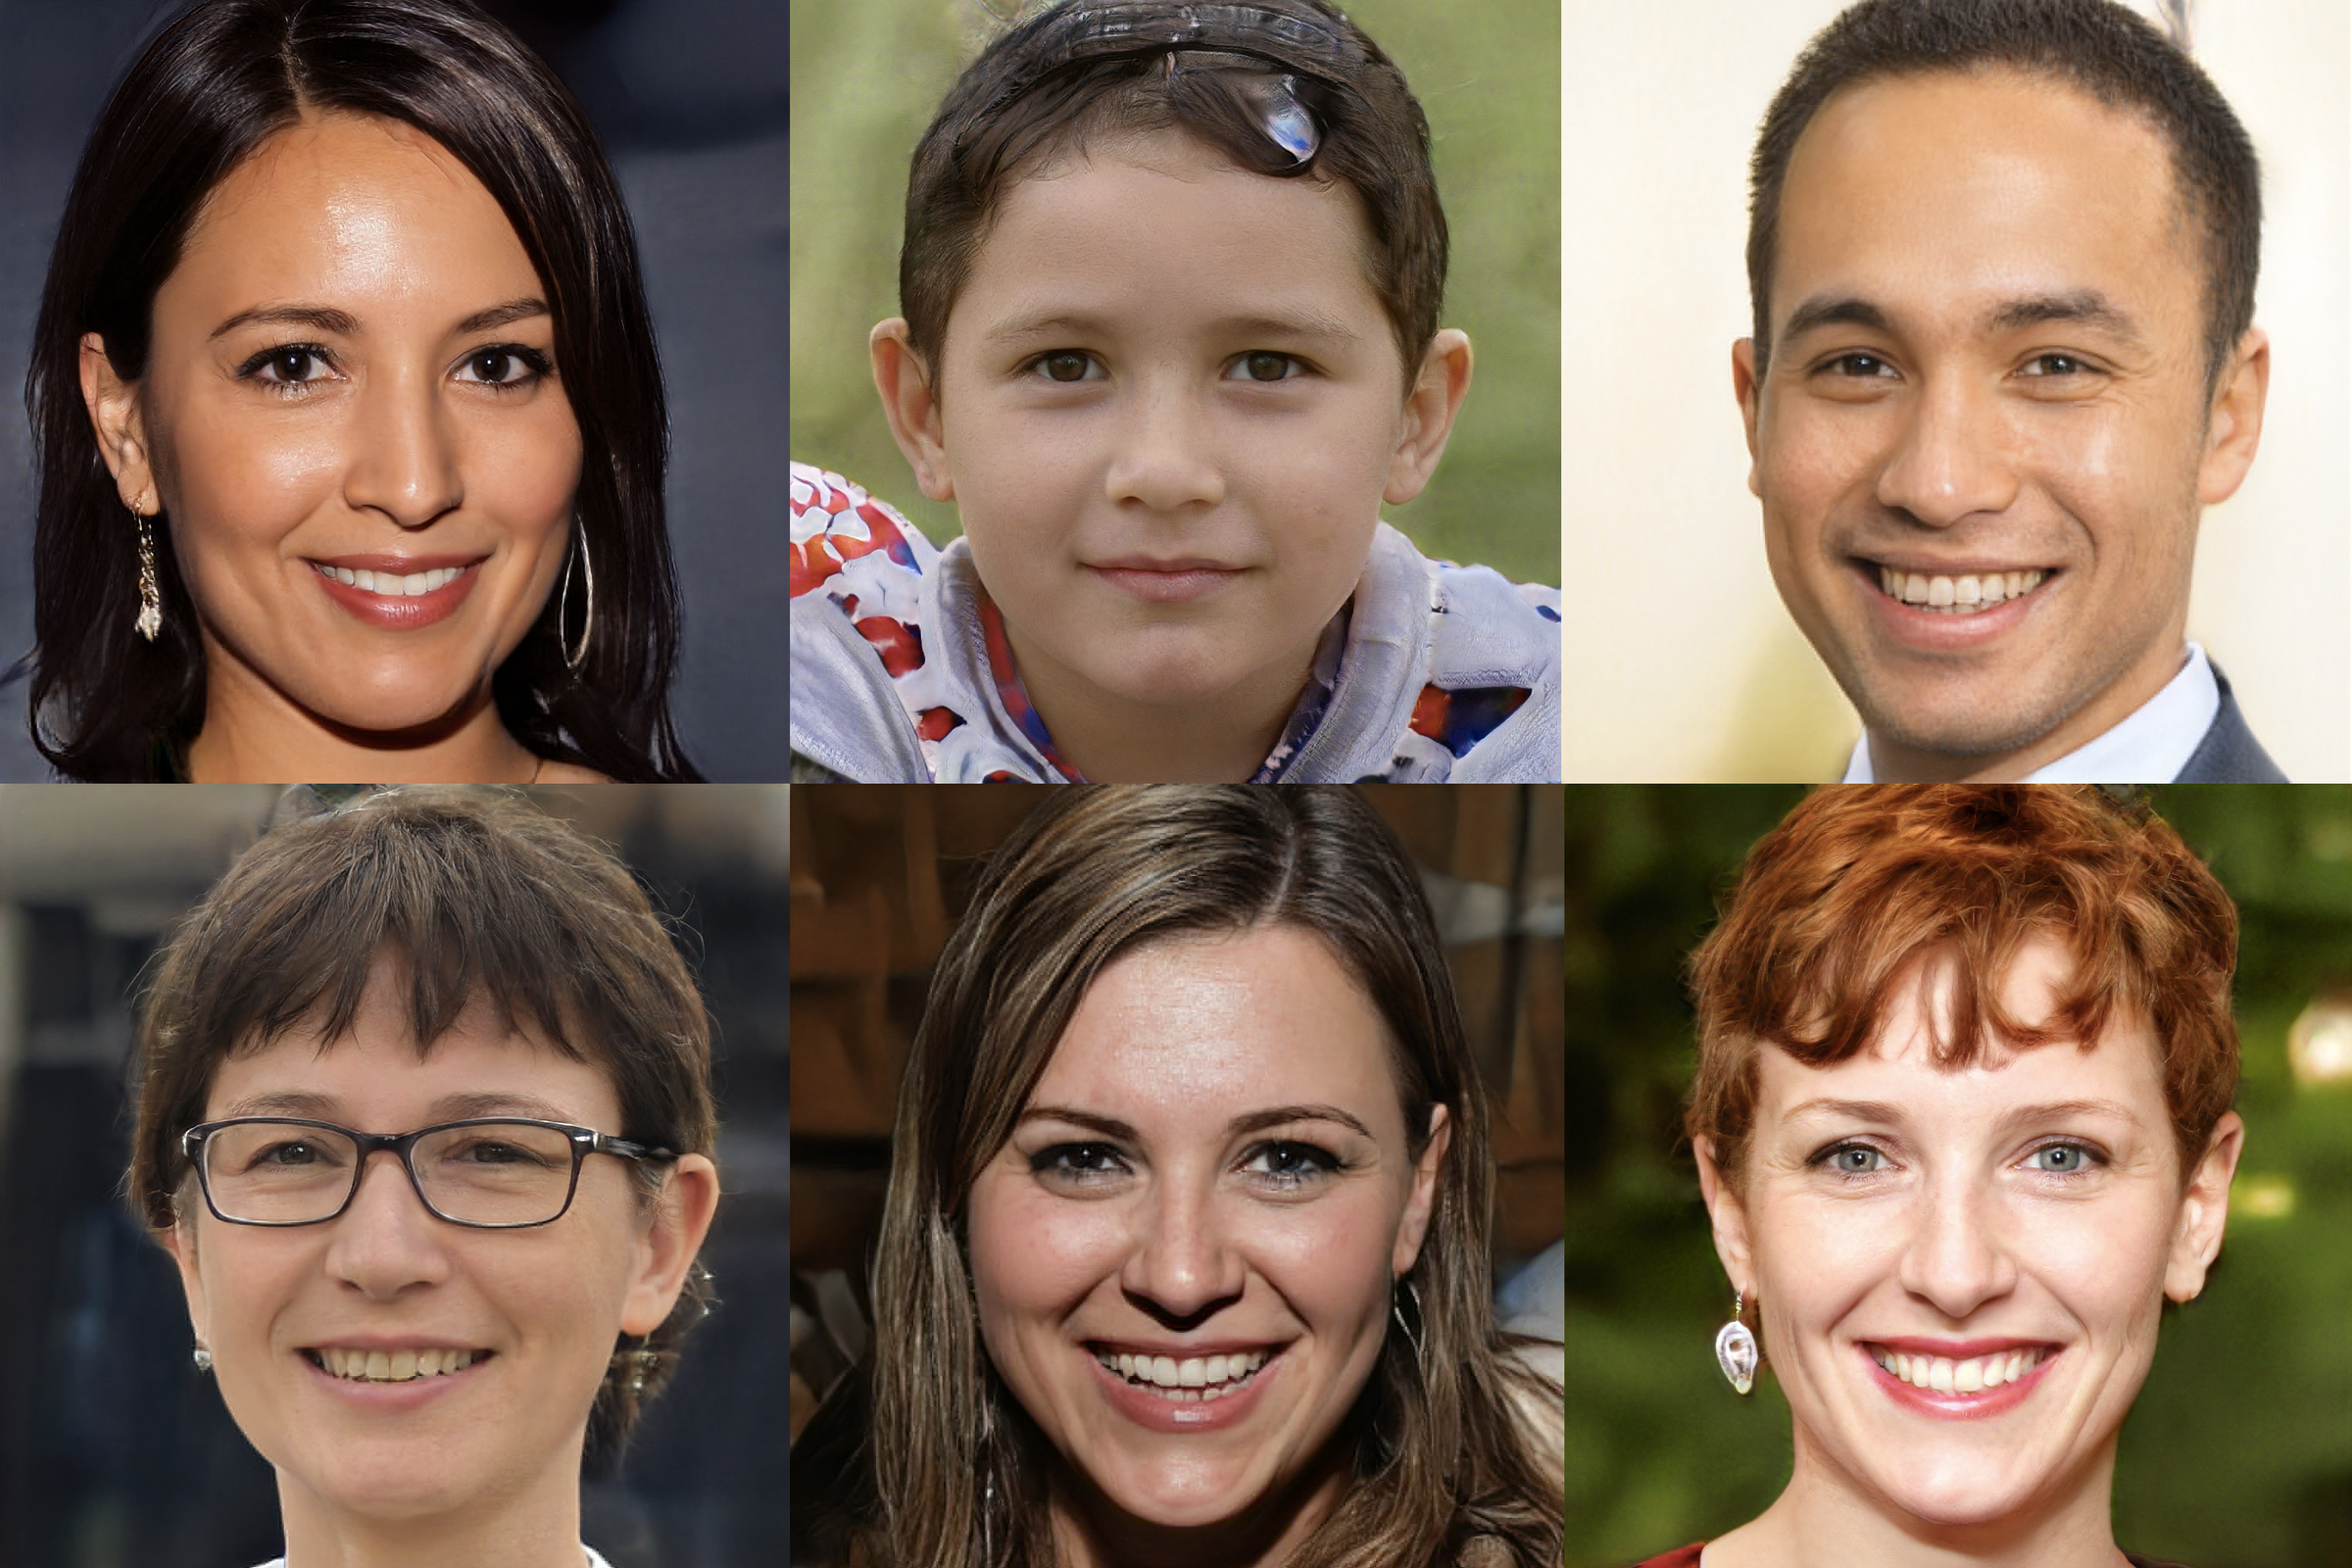 Examples of AI-generated faces, not connected with the network of fake authors described in this news story. 